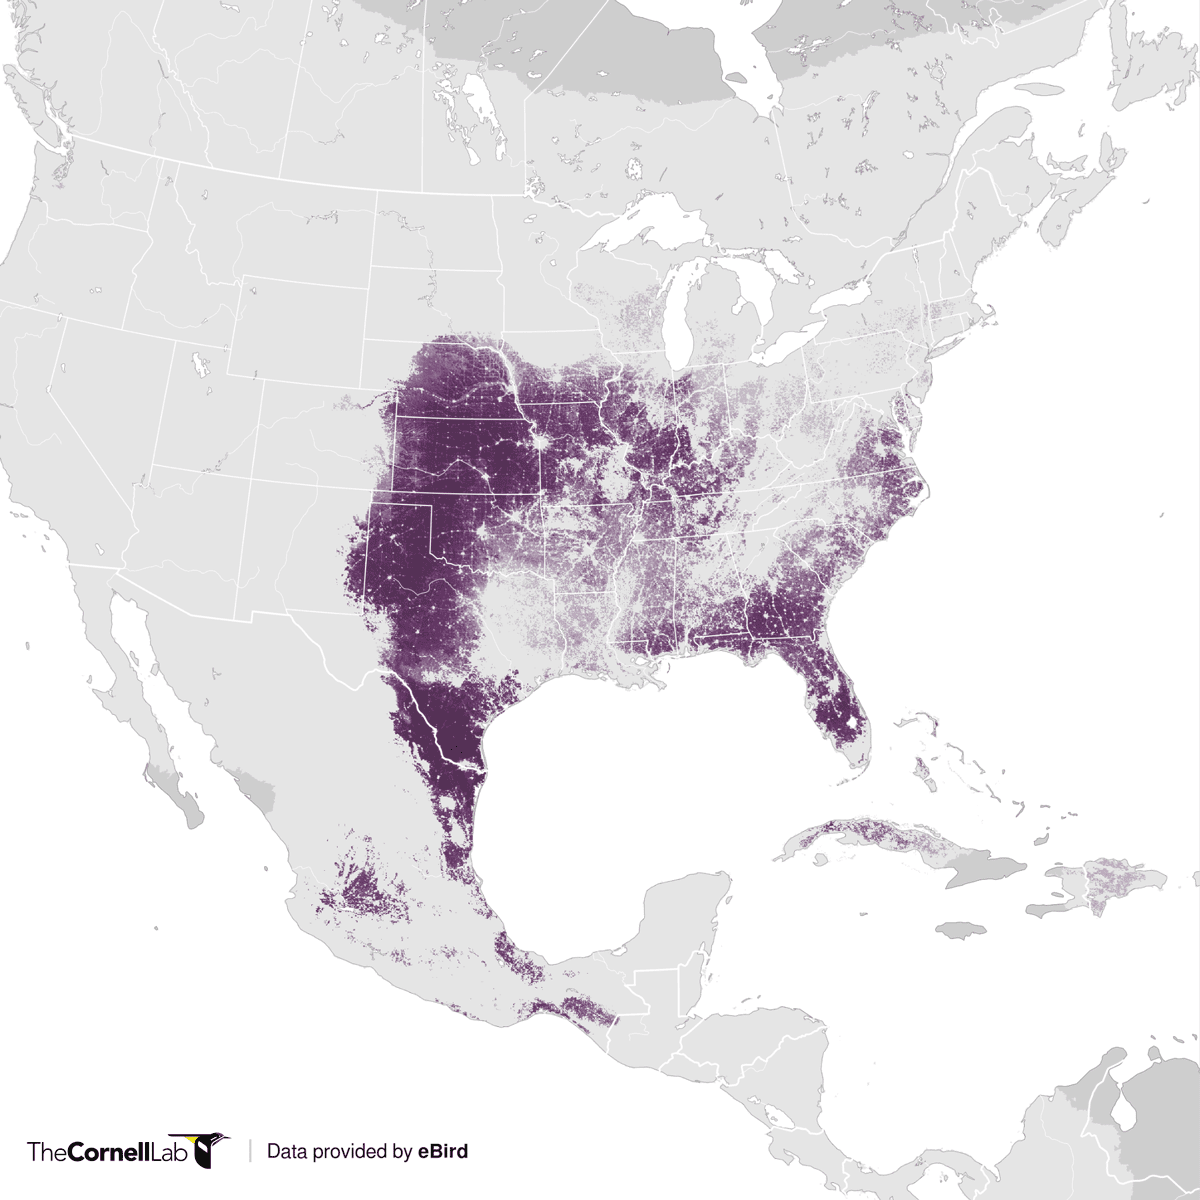 map of North America showing range and abundnace of Northern Bobwhite in purple